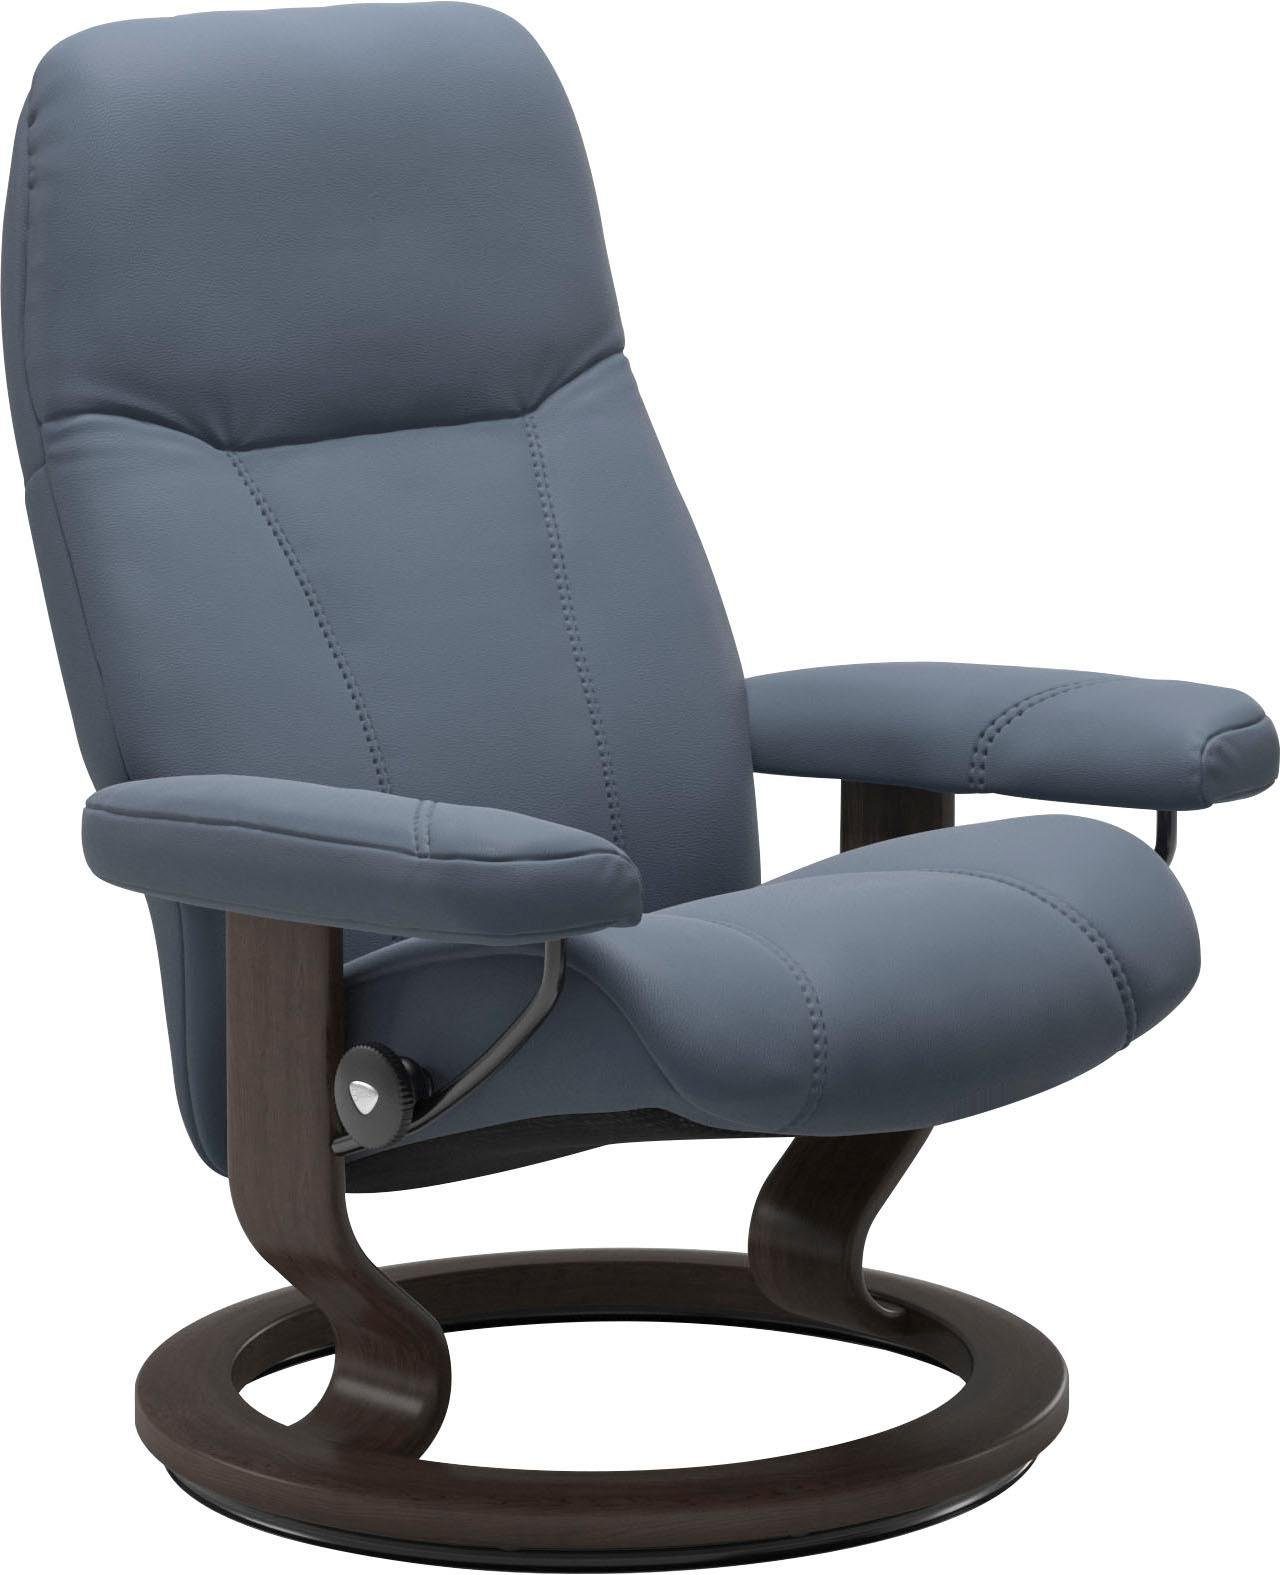 Stressless® Relaxsessel Consul, mit Classic Gestell Größe L, Base, Wenge